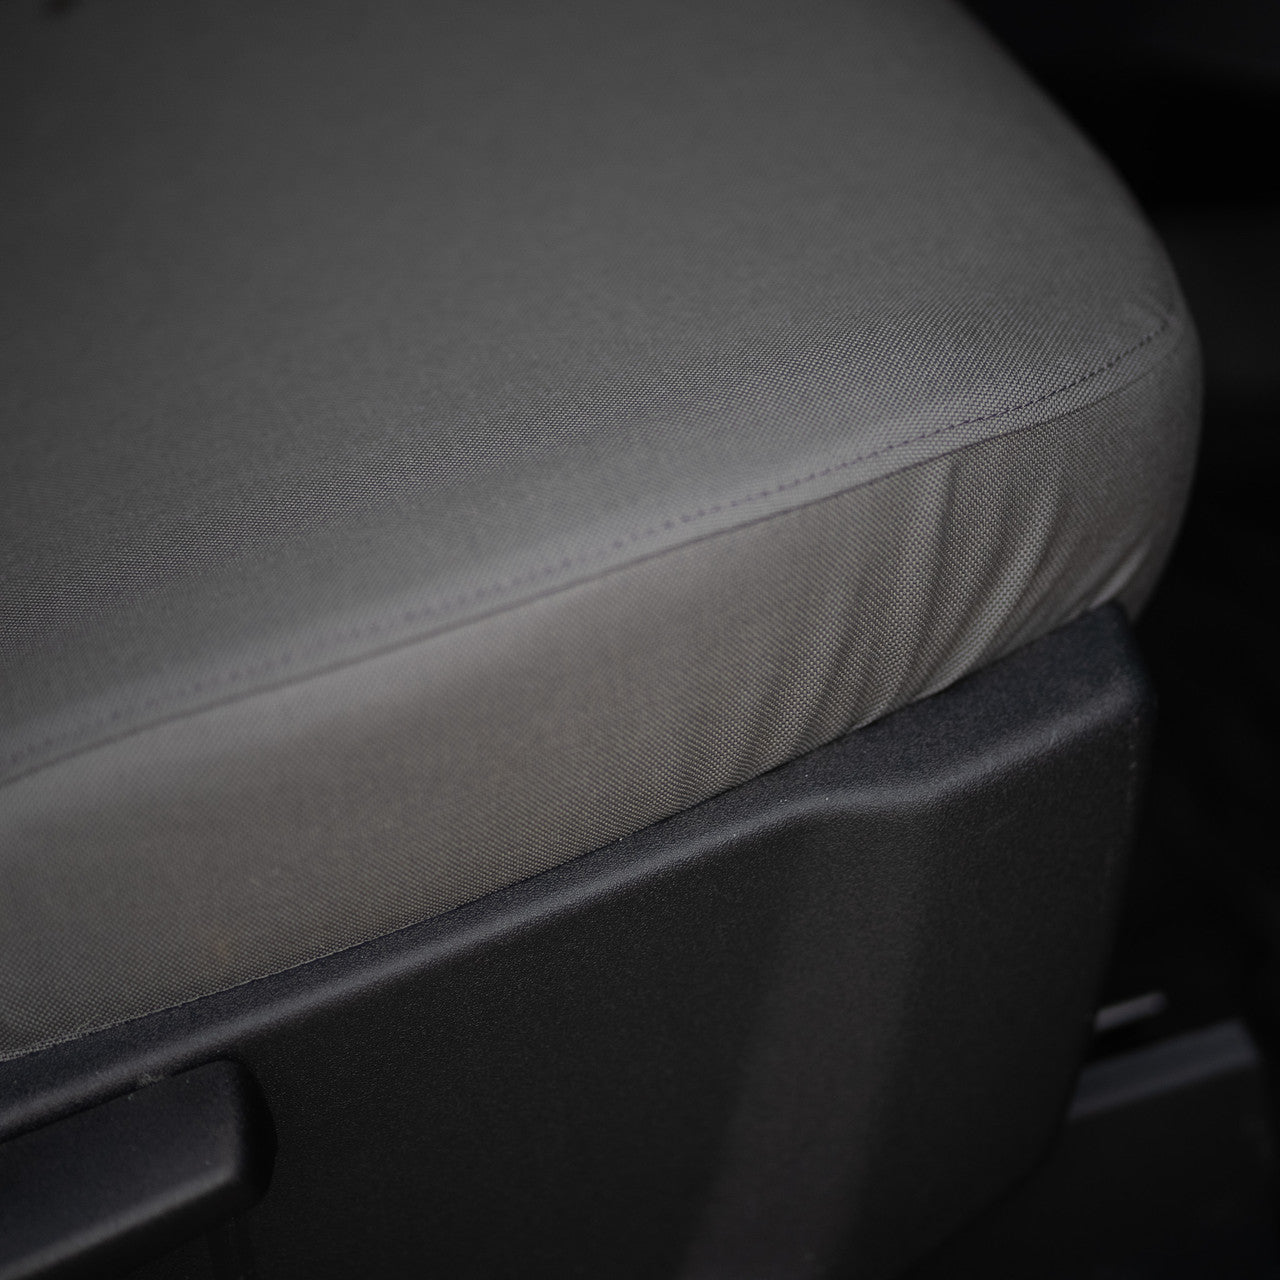 Photo showing the seam detail on the seat cover for the Ford Bronco